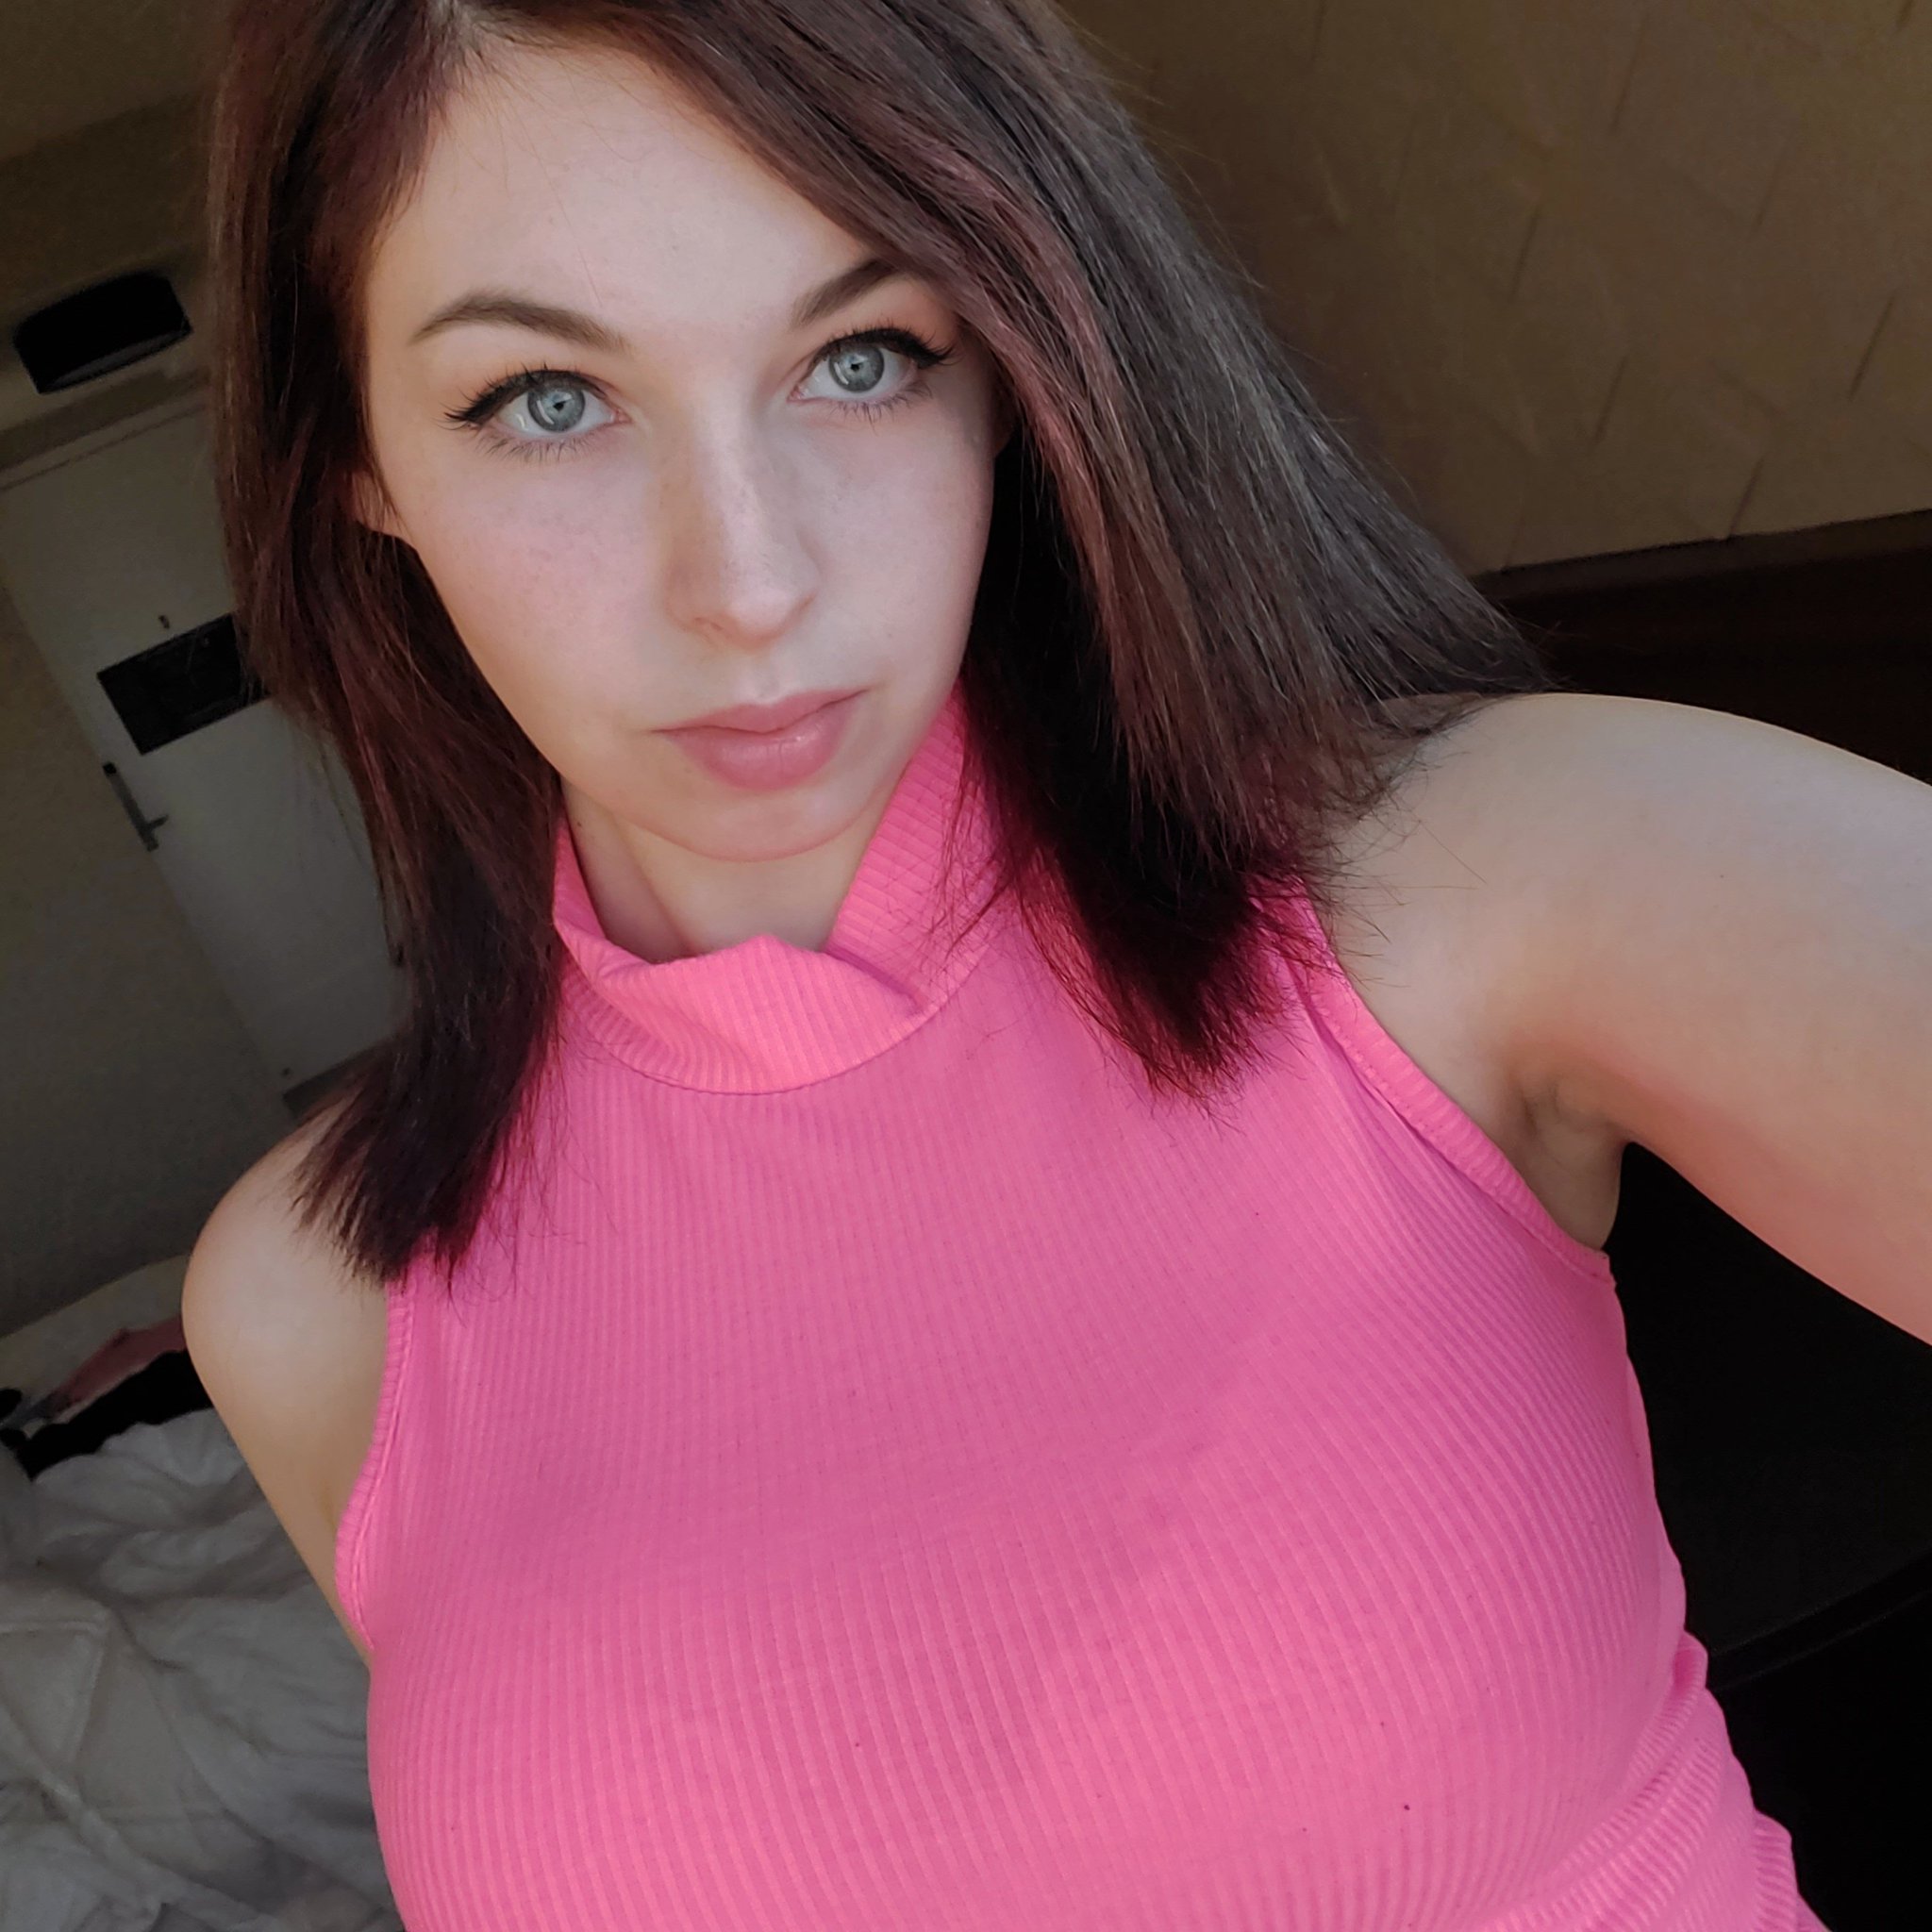 Tw Pornstars 1 Pic Dawn Willow Twitter Ready For My Photo Shoot Chaturbate 12 16 Pm 22